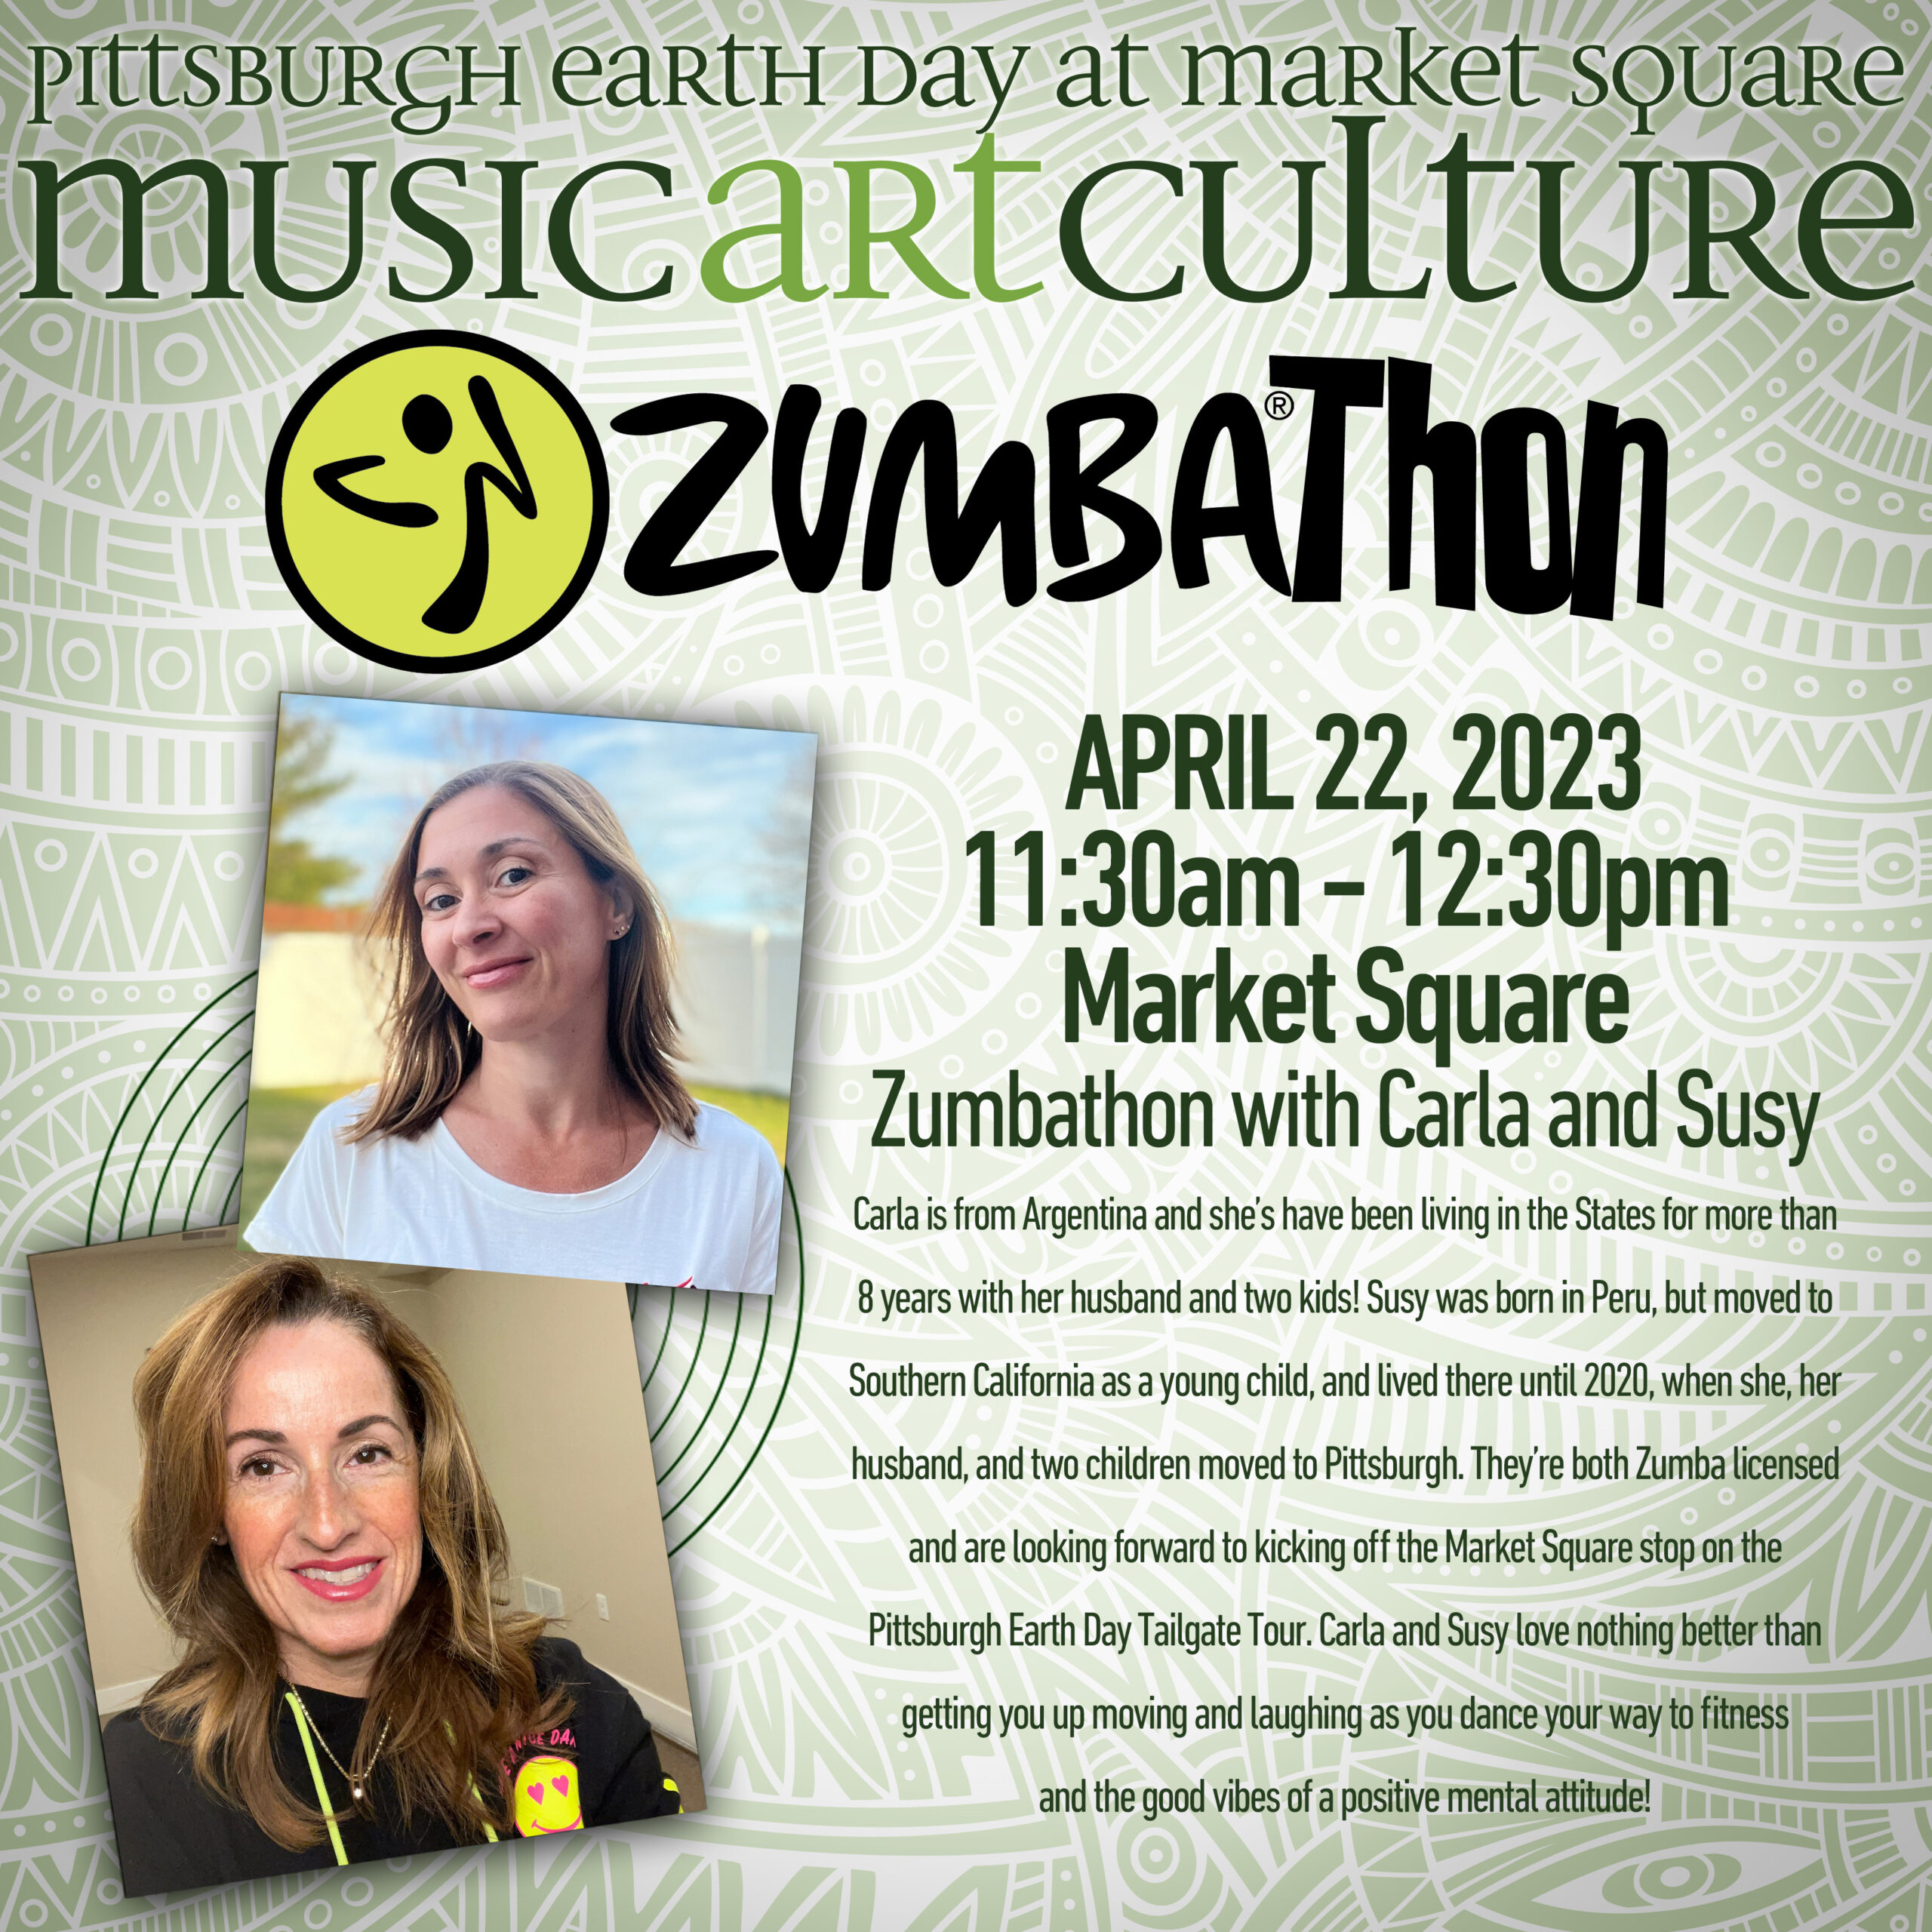 Pittsburgh Earth Day Music Art and Culture Festival Zumbathon with Carla and Susy